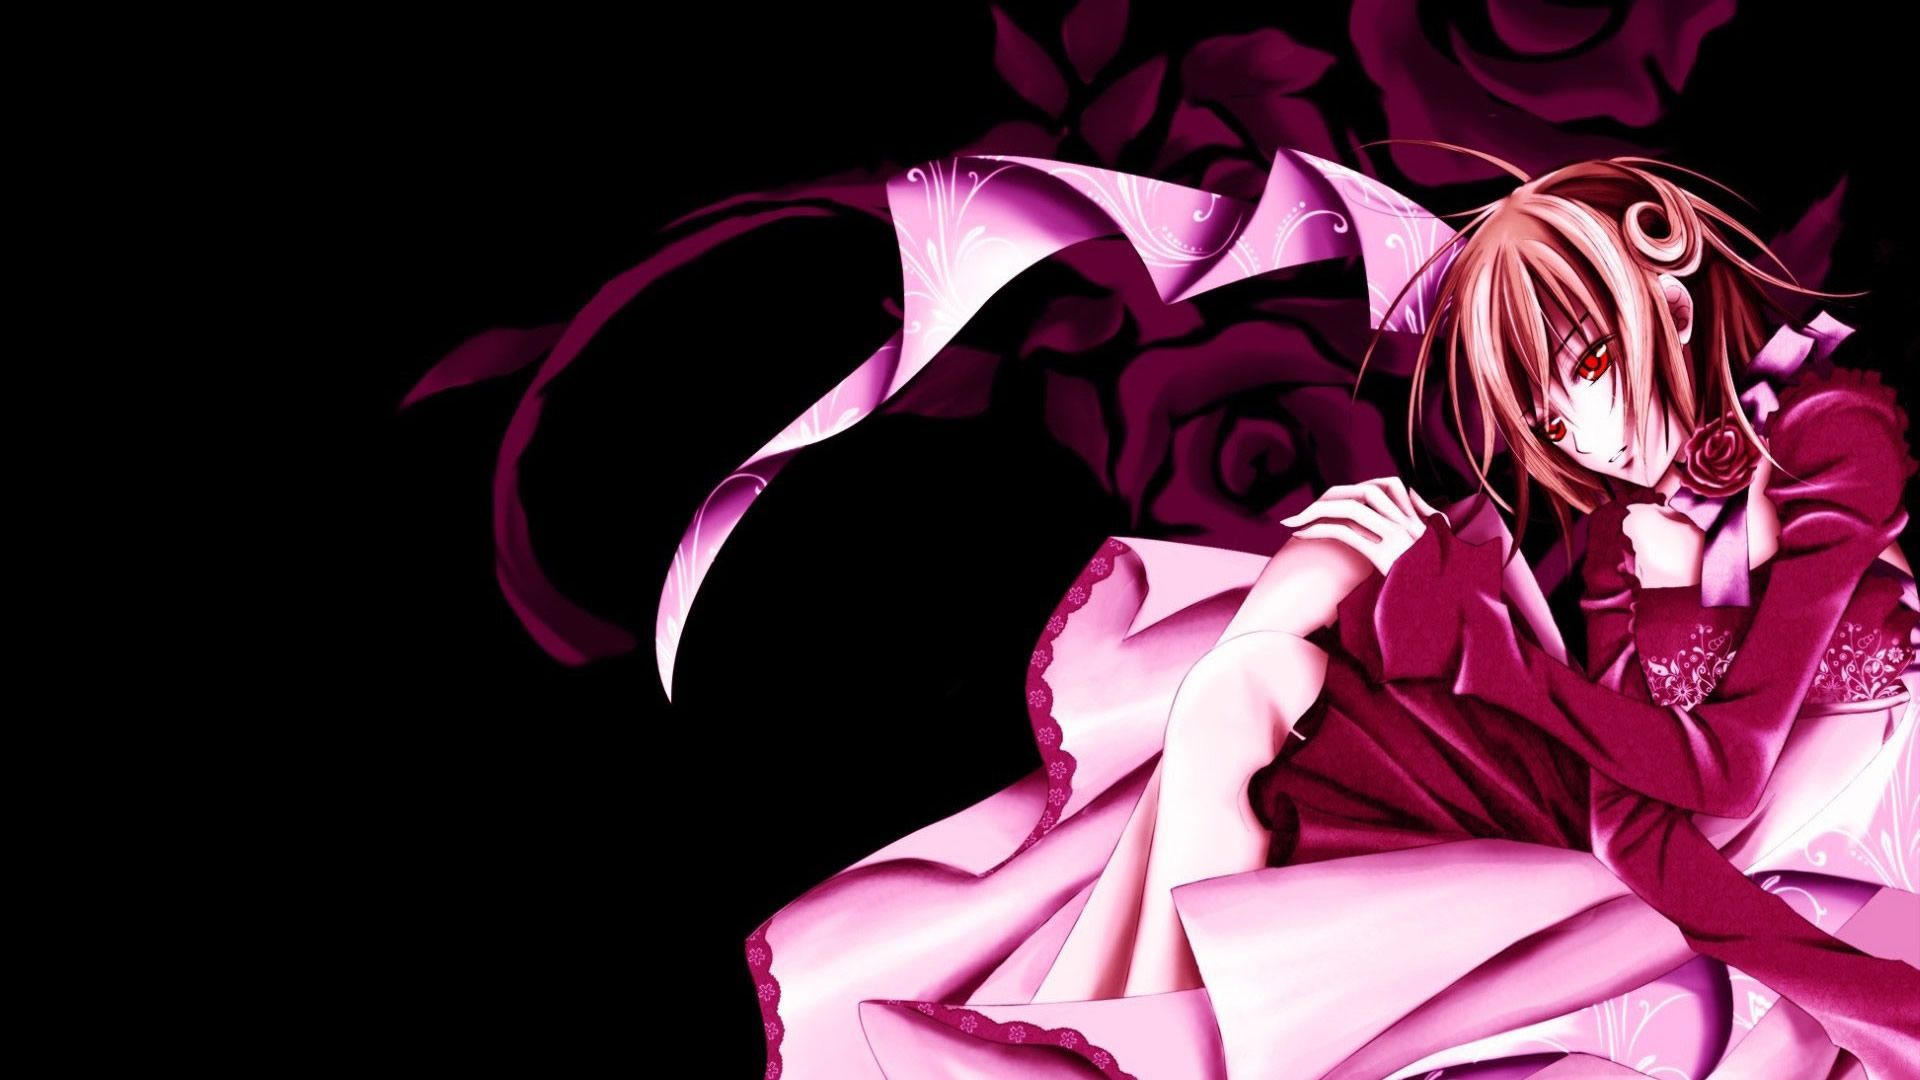 53 Awesome HD Anime Wallpapers for Your Desktop - High Definition